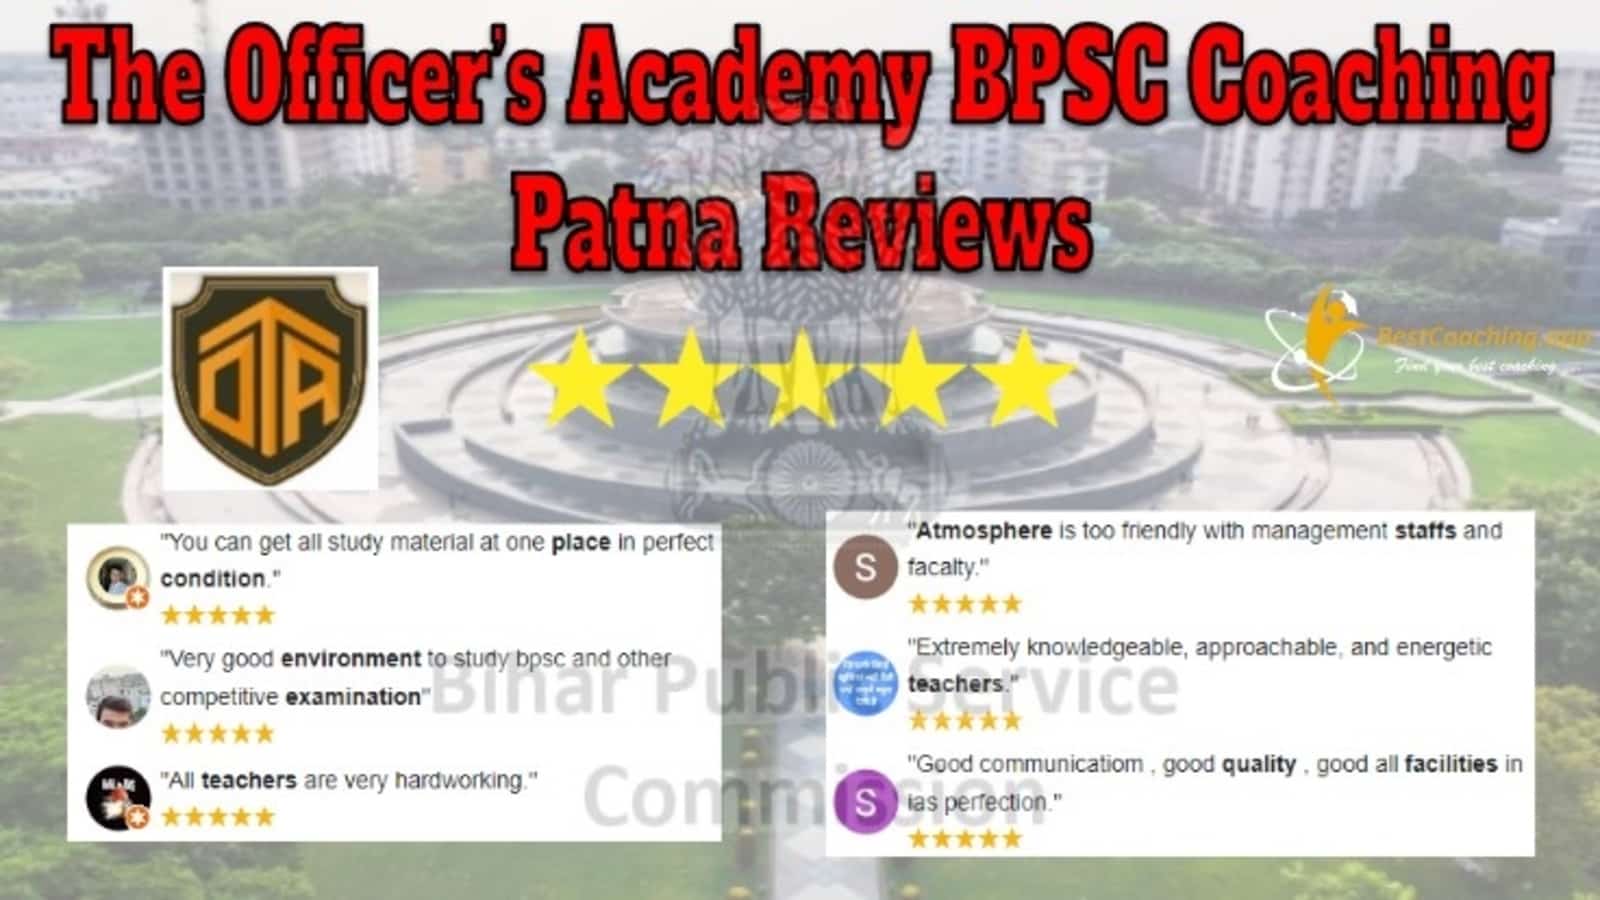 The Officer’s Academy BPSC Coaching in Patna Reviews